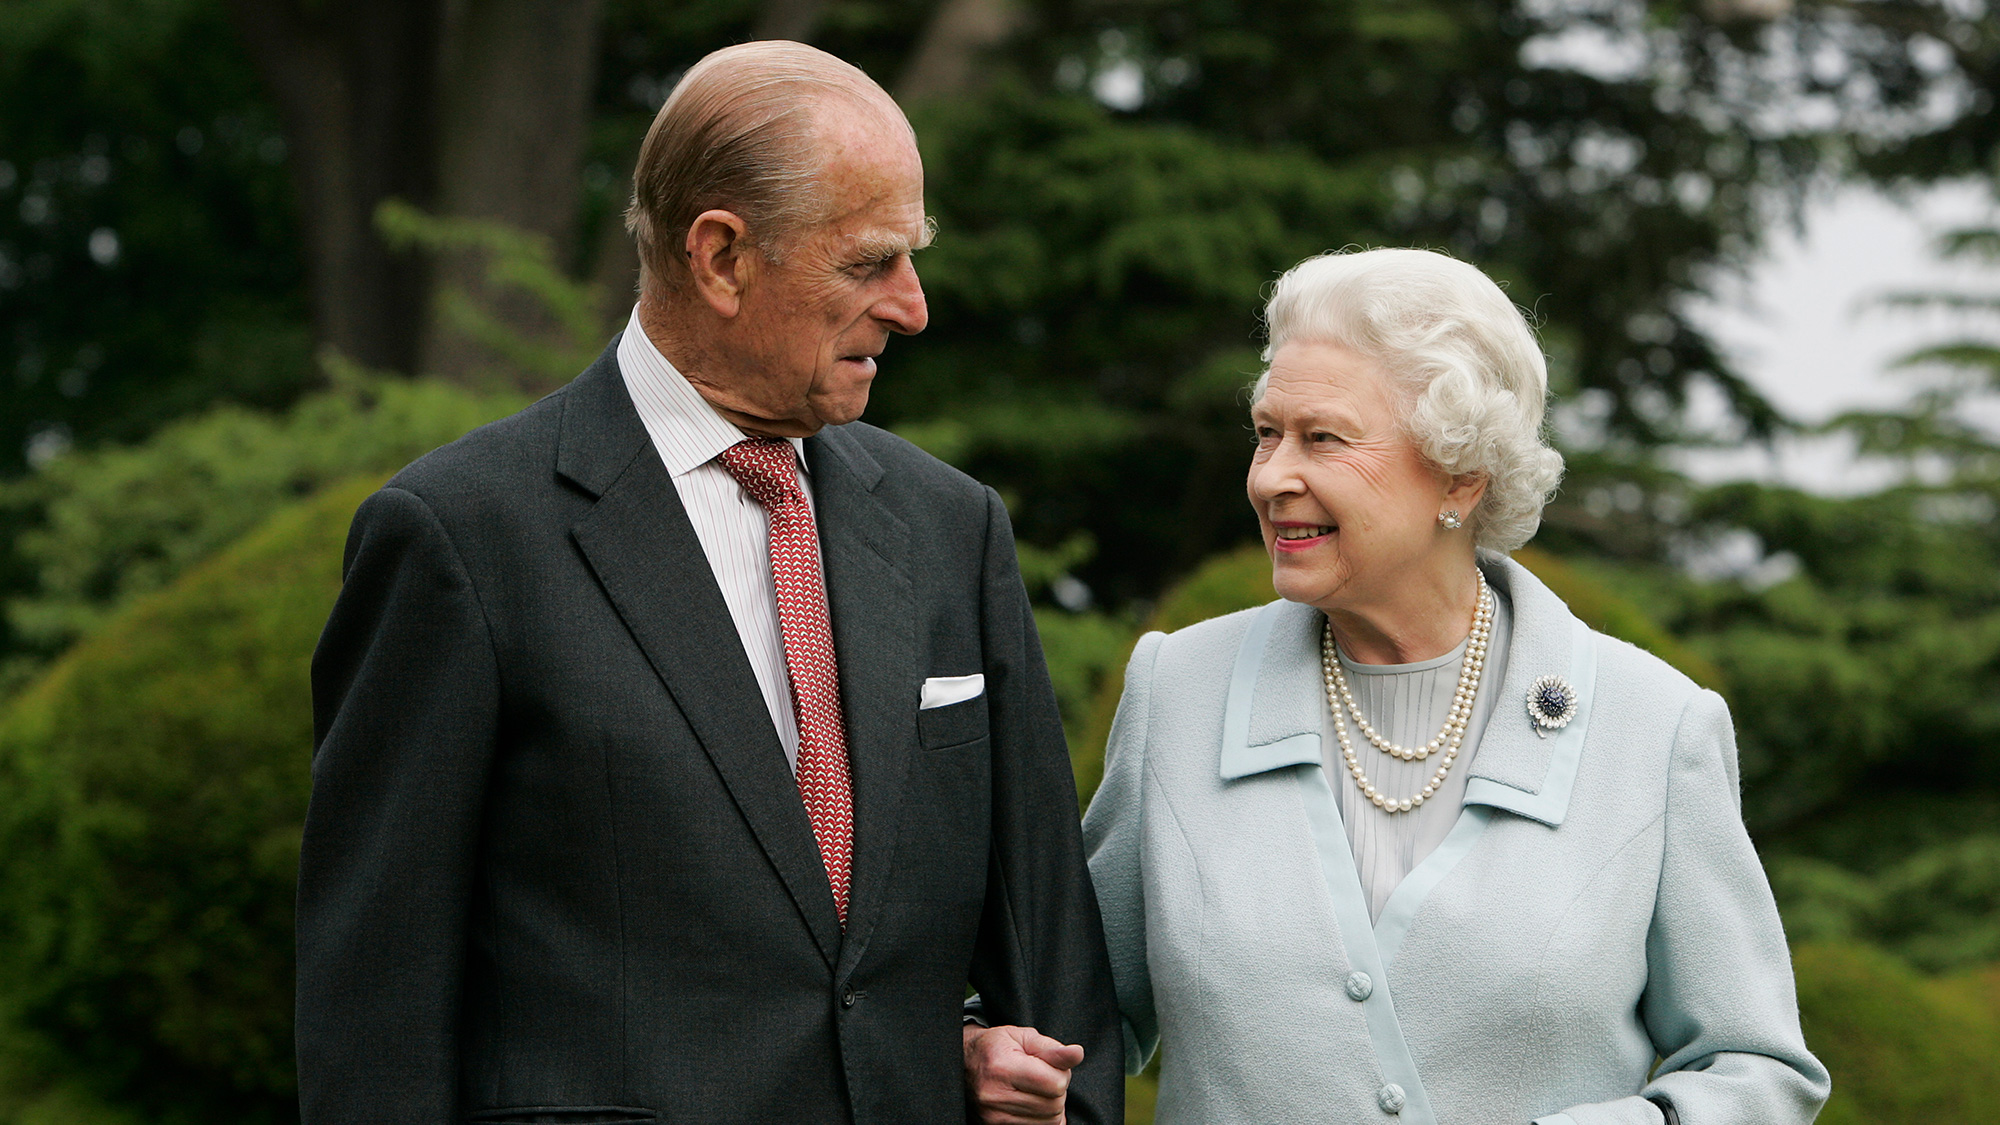 The Queen’s anniversary brooch is more sentimental than you think